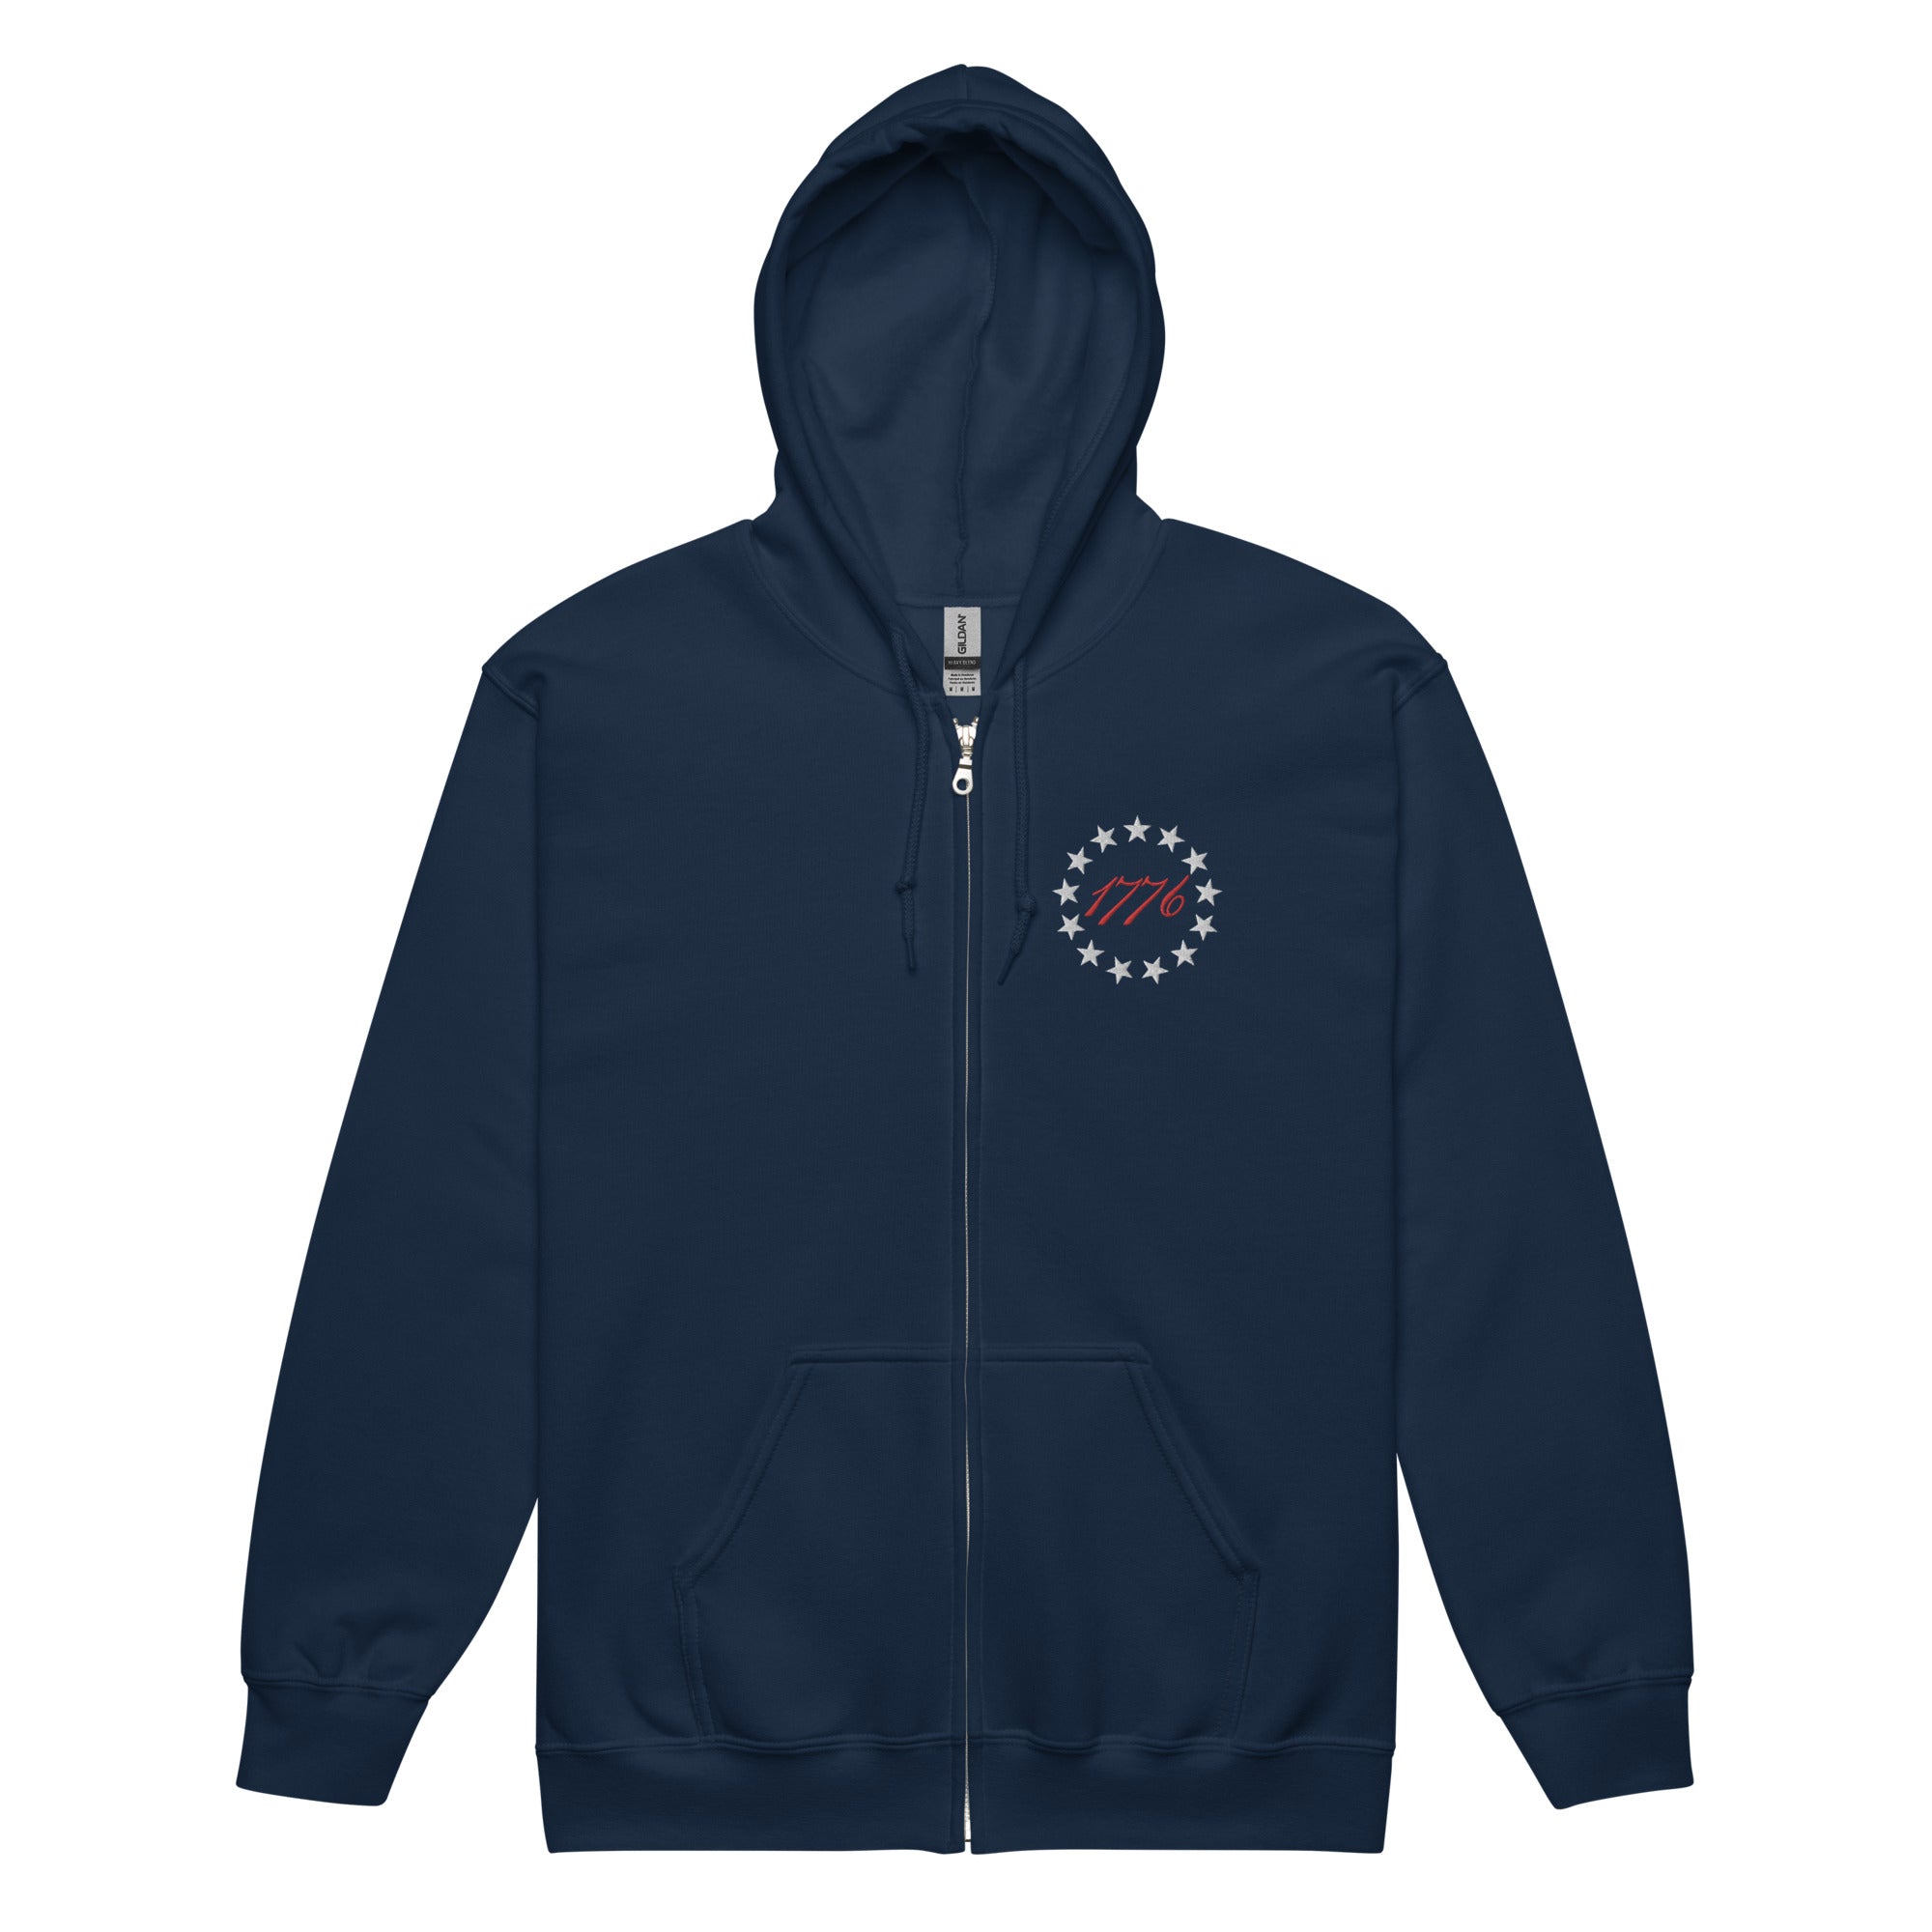 Betsy Ross 1776 Embroidered Heavy Blend Zip Hoodie